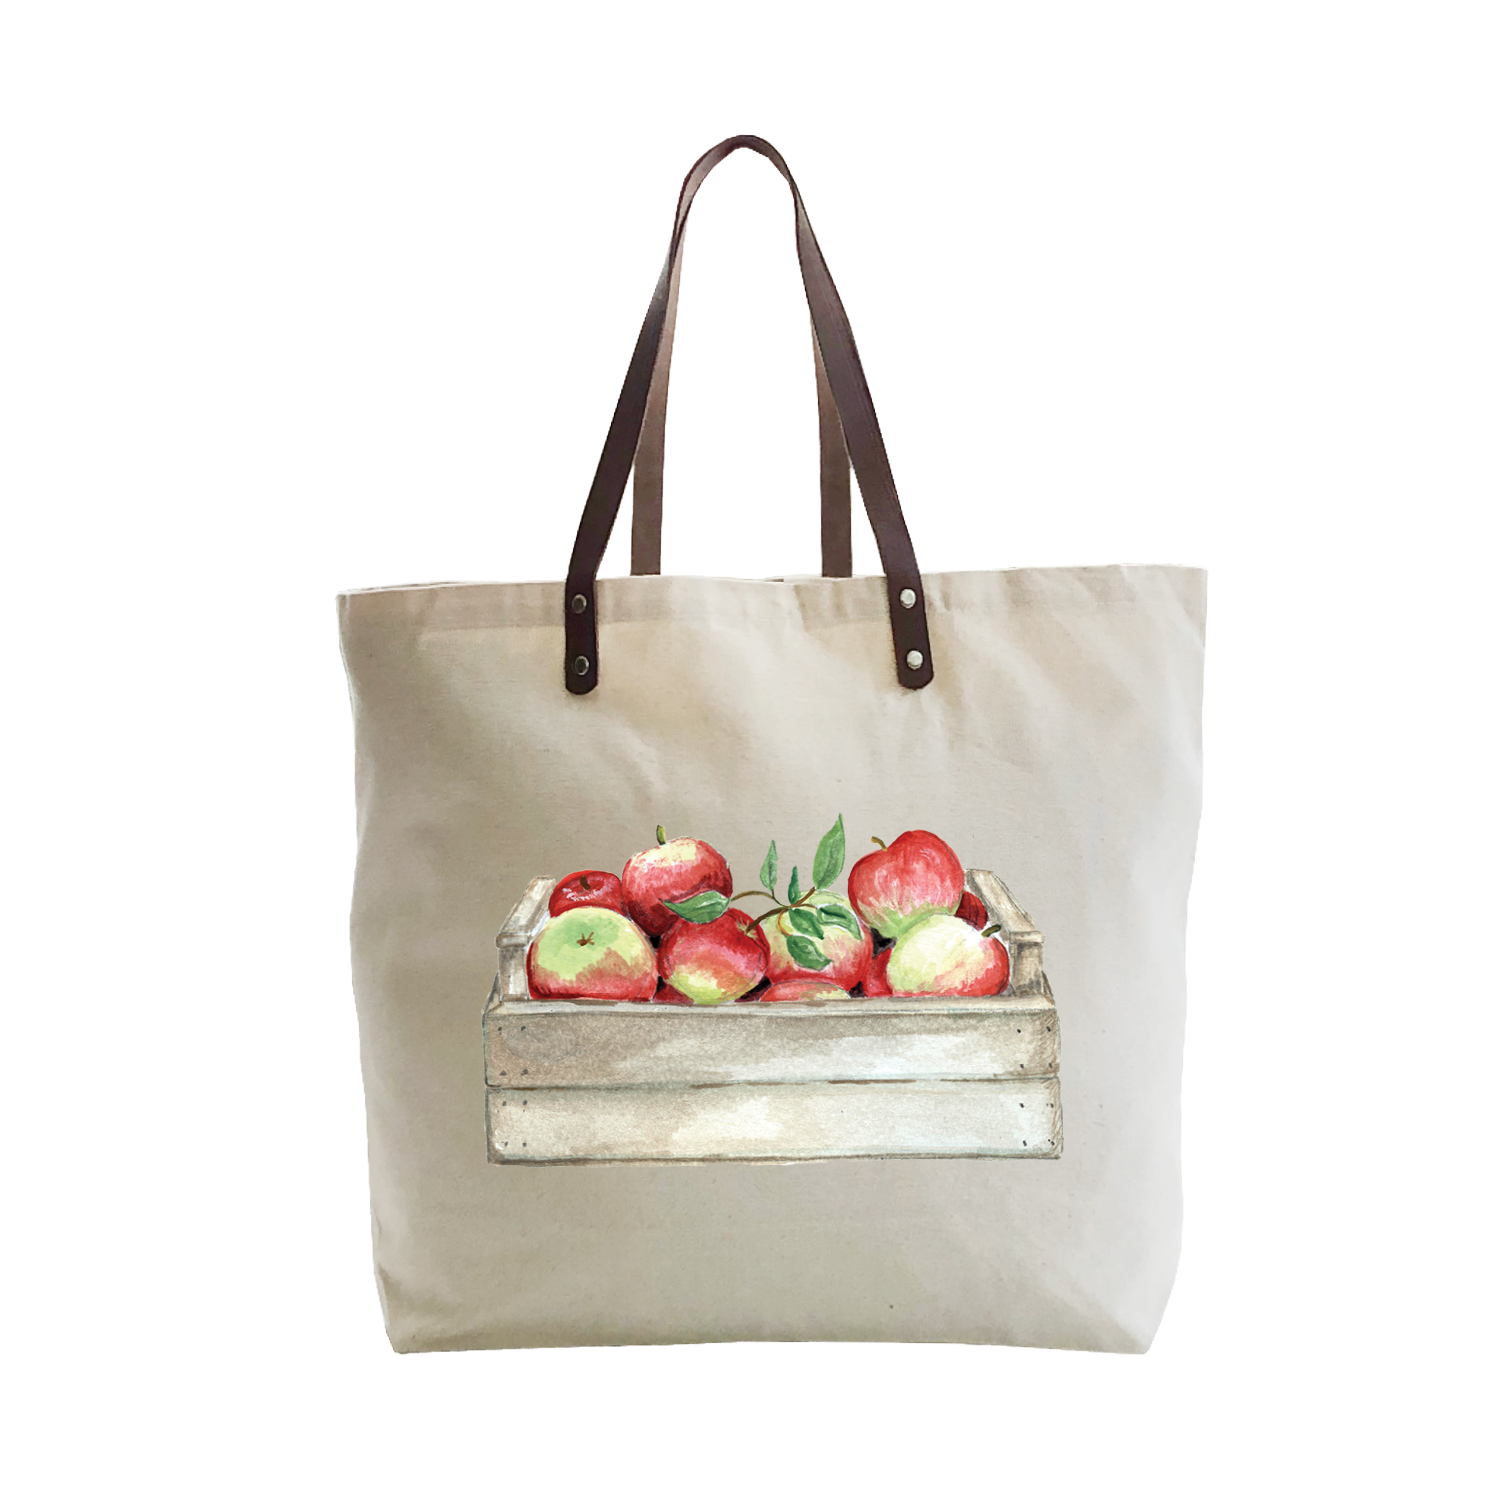 apples in crate large tote